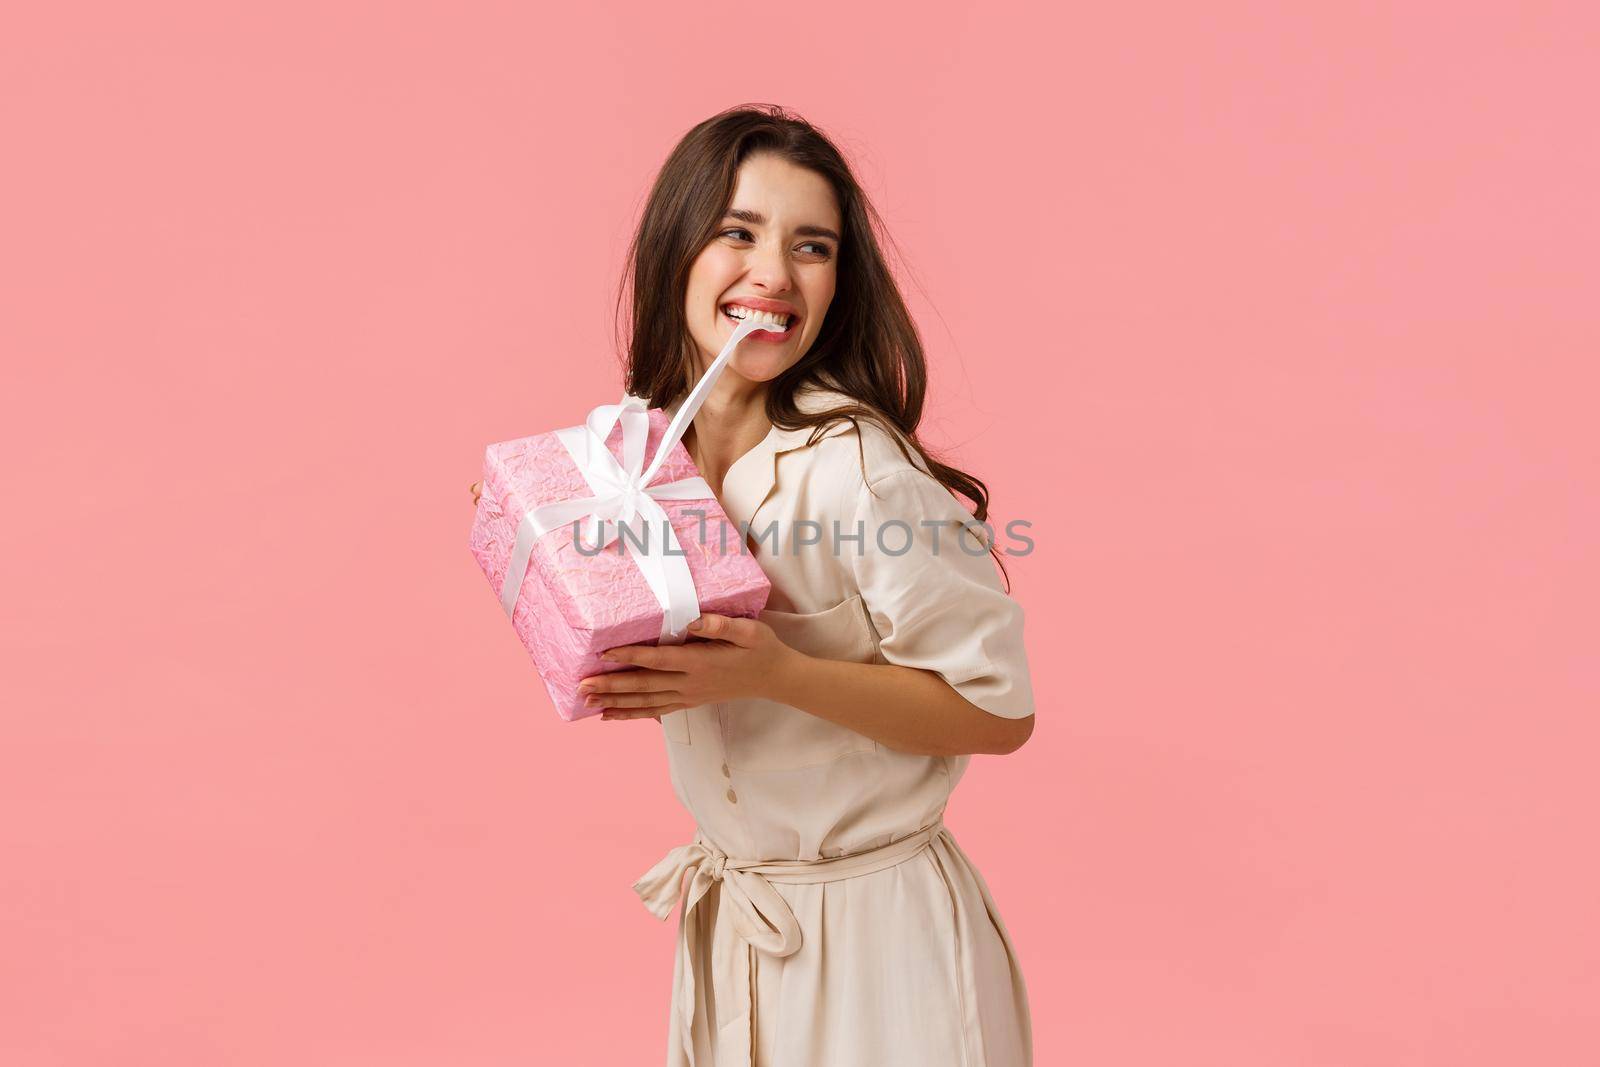 Happiness, tenderness and celebration concept. Carefree happy and upbeat young girl partying, having amazing birthday day, biting knot on cute gift, smiling, tempting unwrap present, pink background.